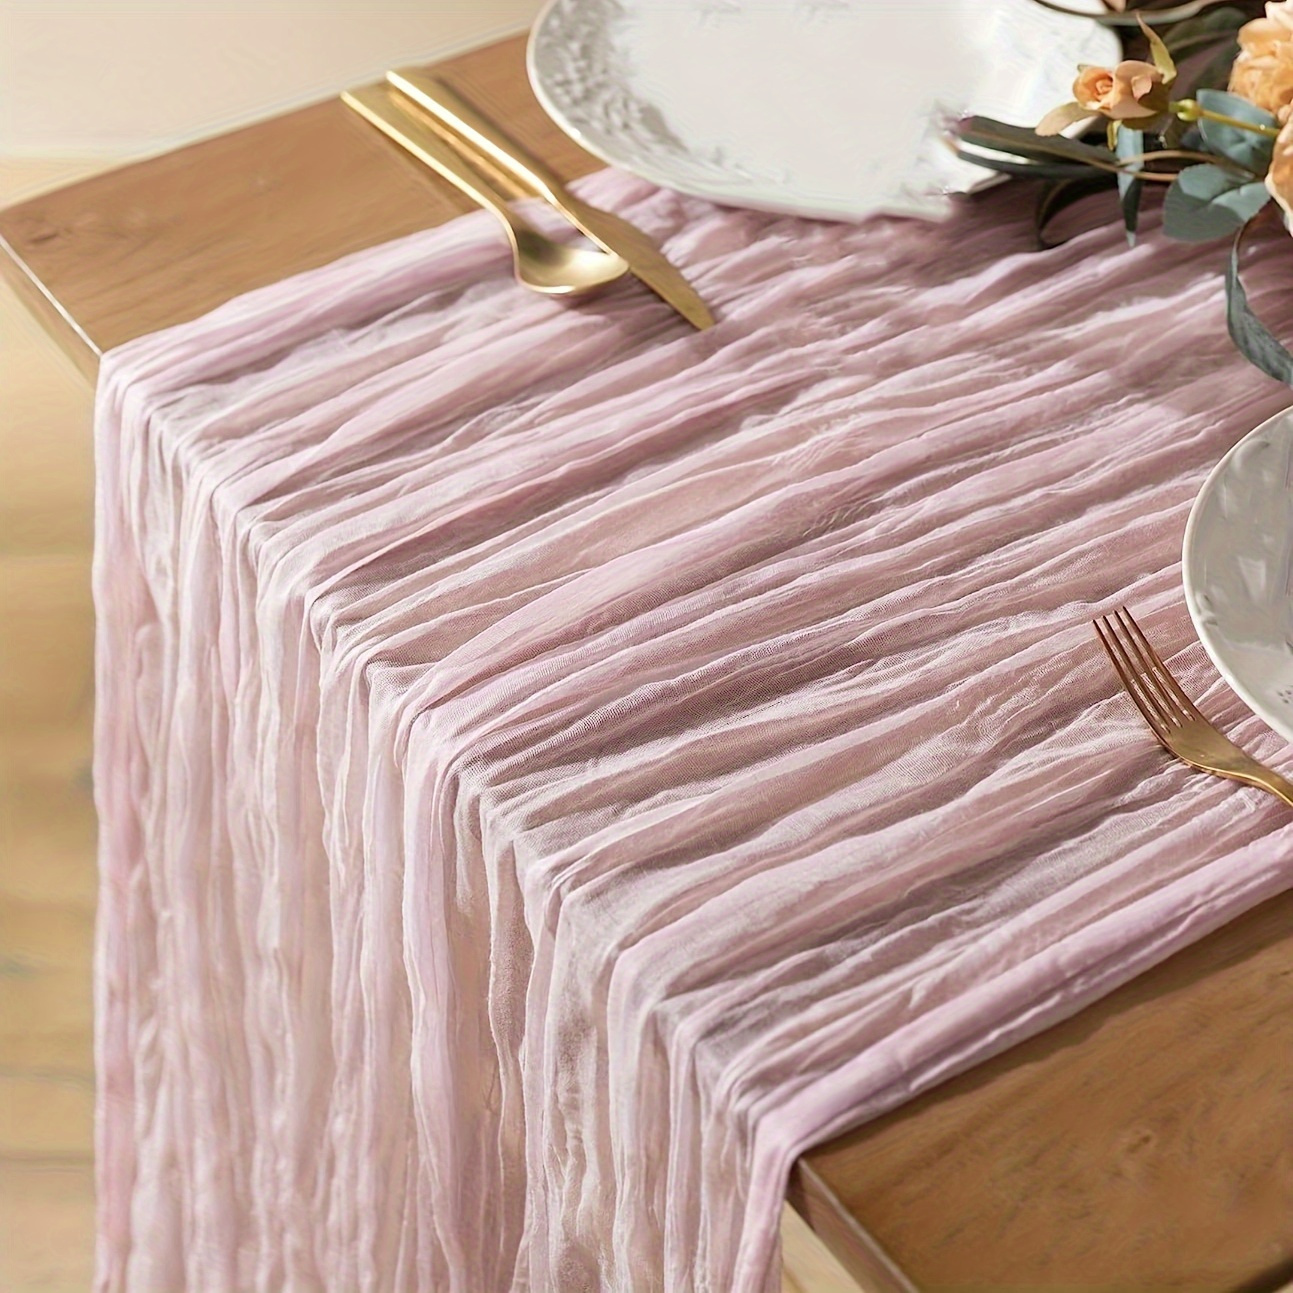 

1pc Square Linen Blend Cotton Weave Woven Pink Cheesecloth Table Runner For Wedding, Bridal Shower, Summer Room Decor - Bohemian Country Style Gauze Tablecloth